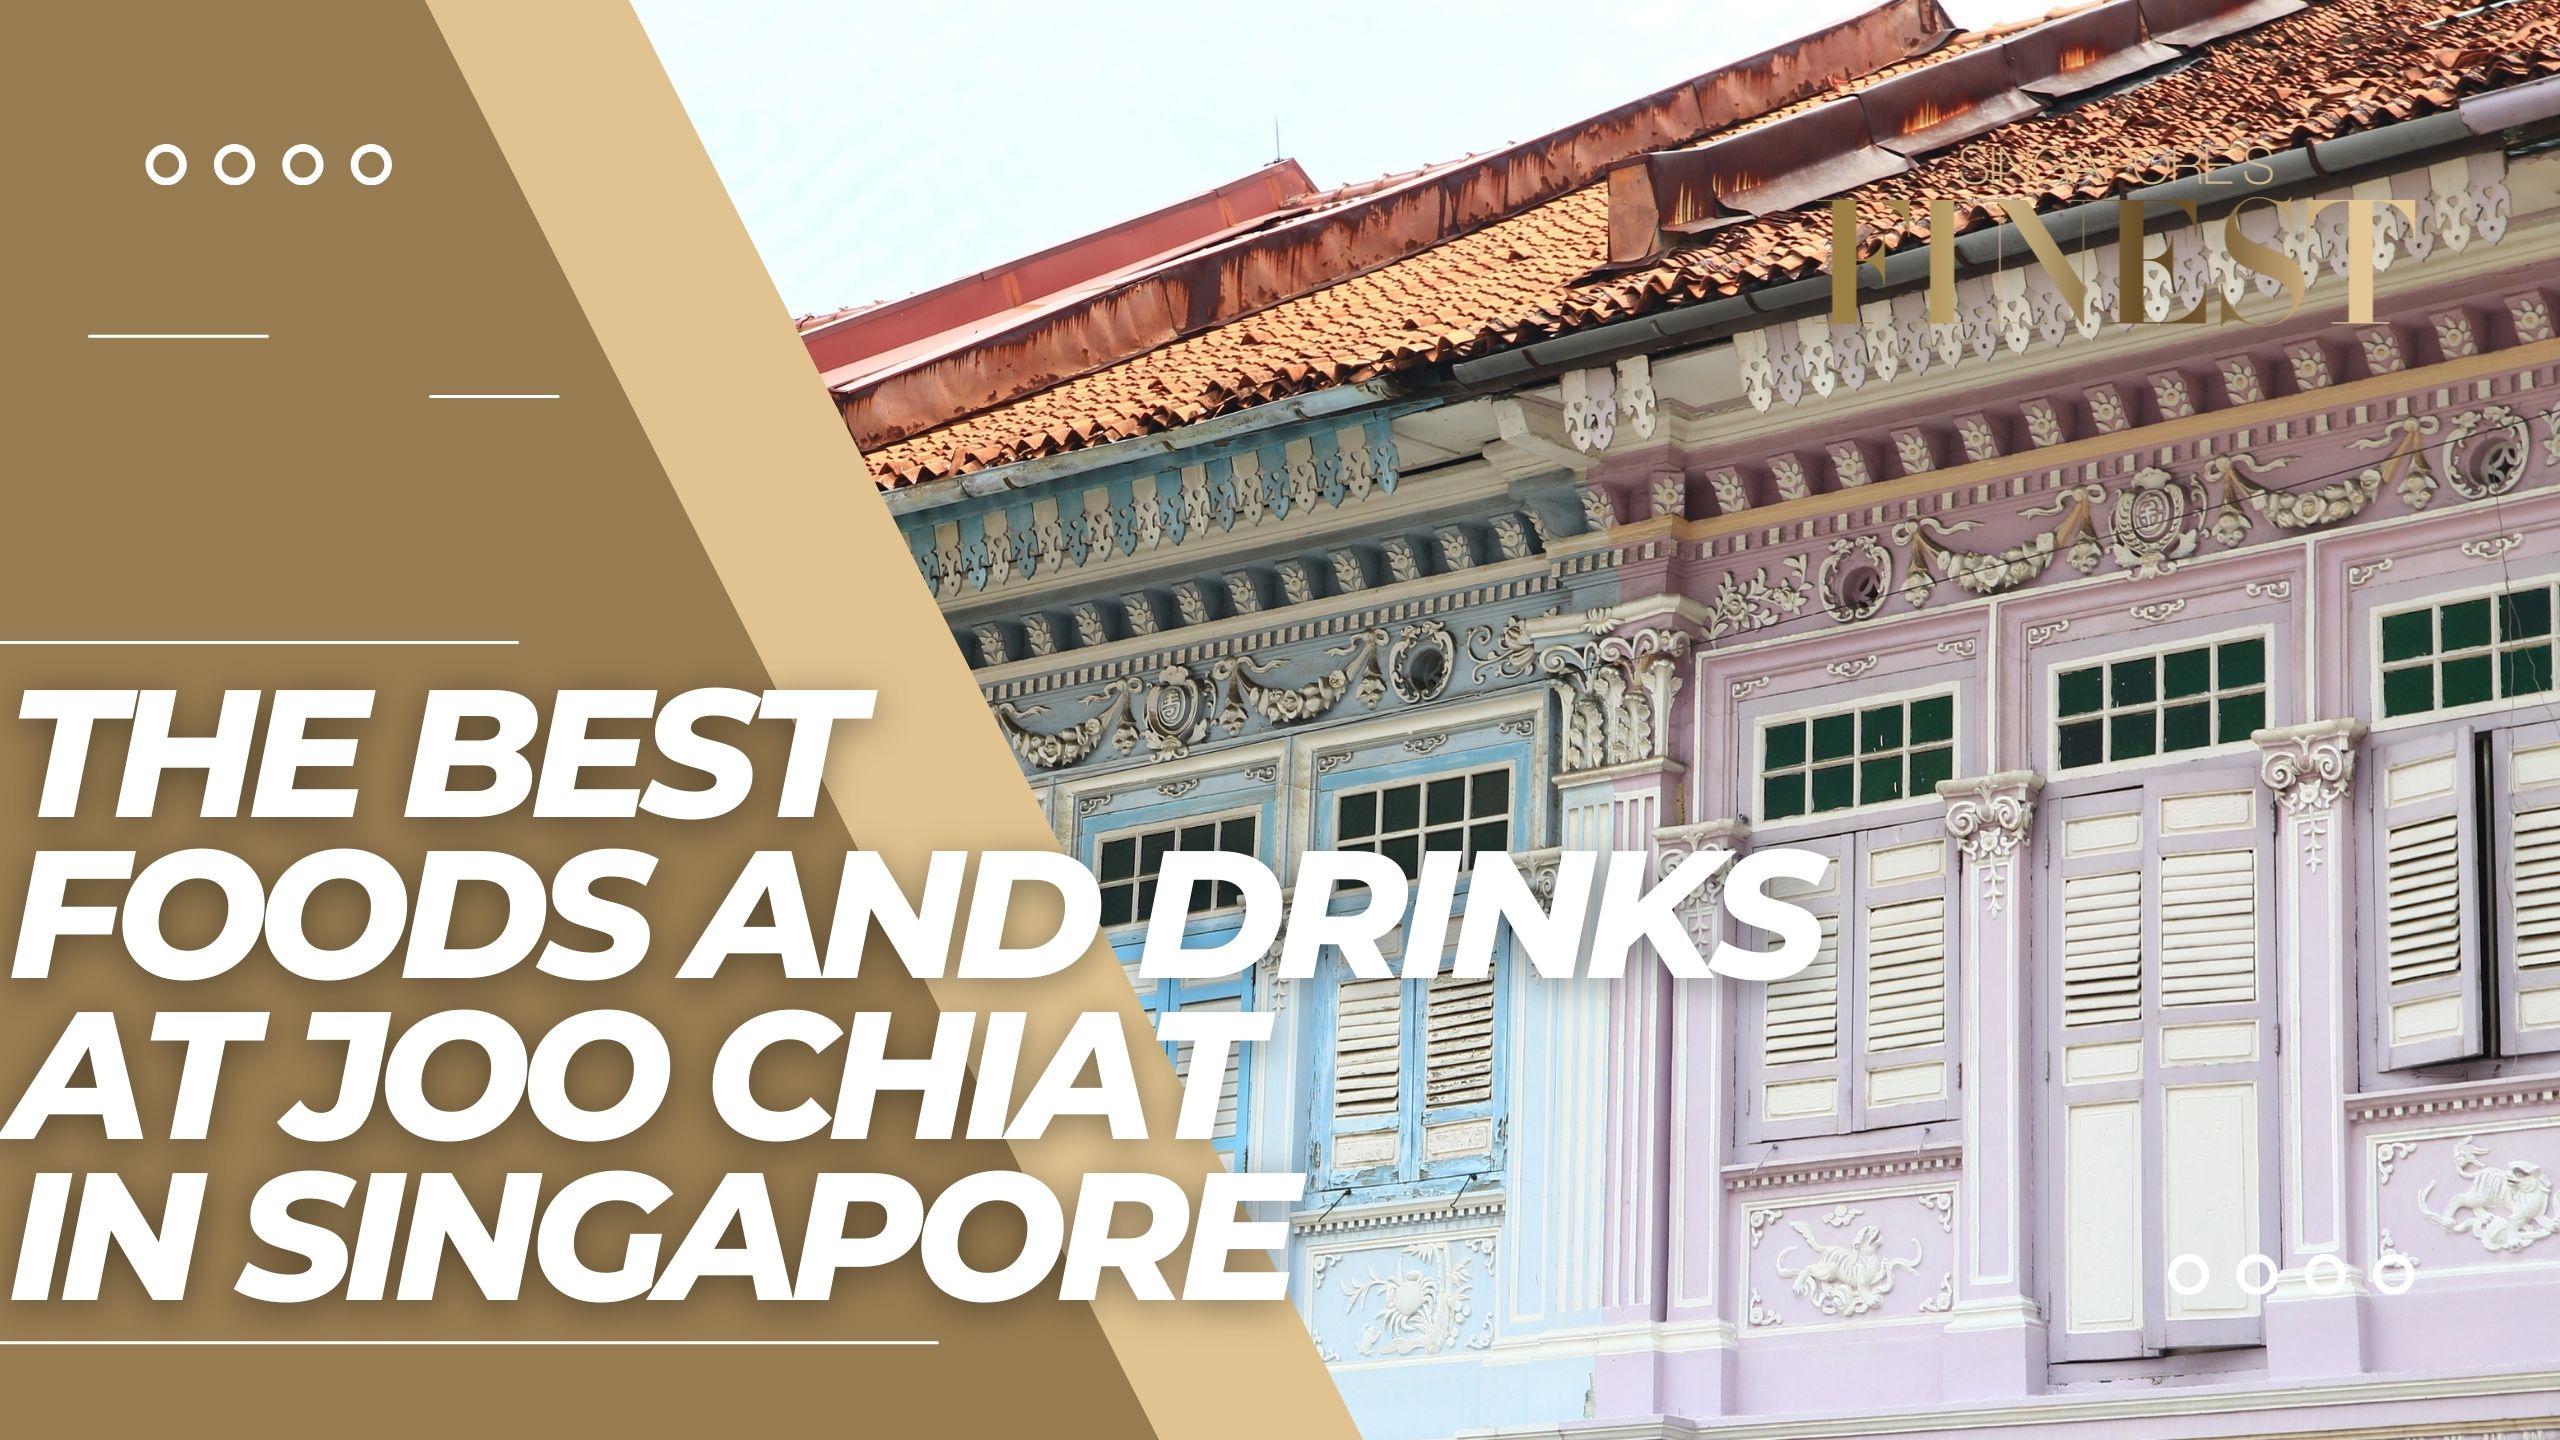 The Finest Food and Drinks at Joo Chiat in Singapore